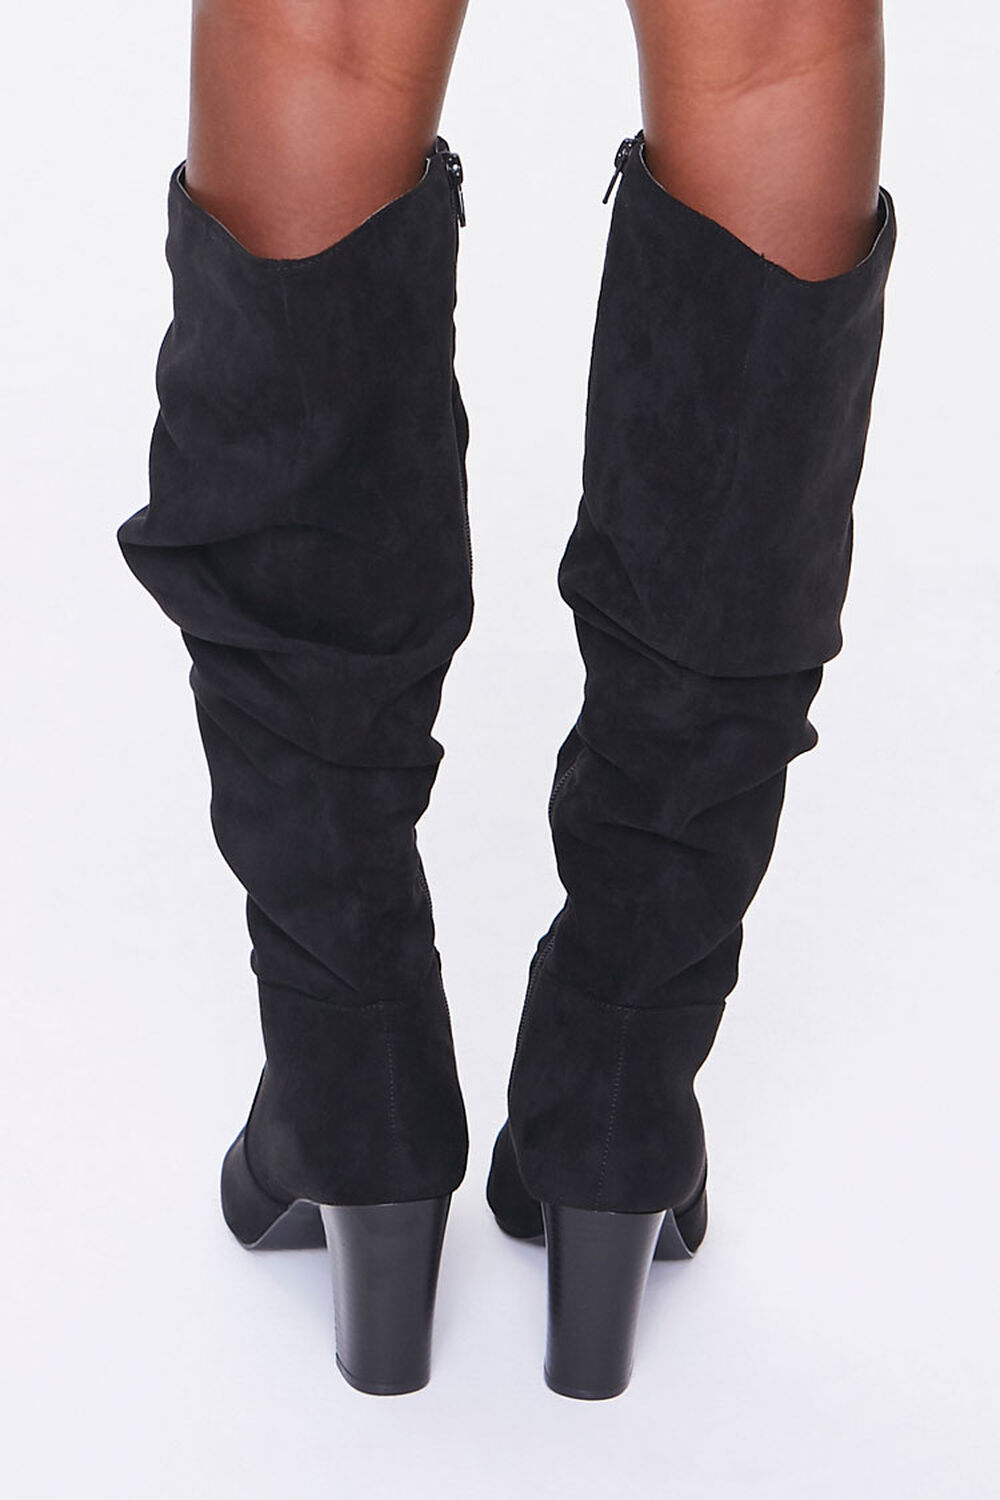 BLACK Slouchy Knee-High Boots, image 3